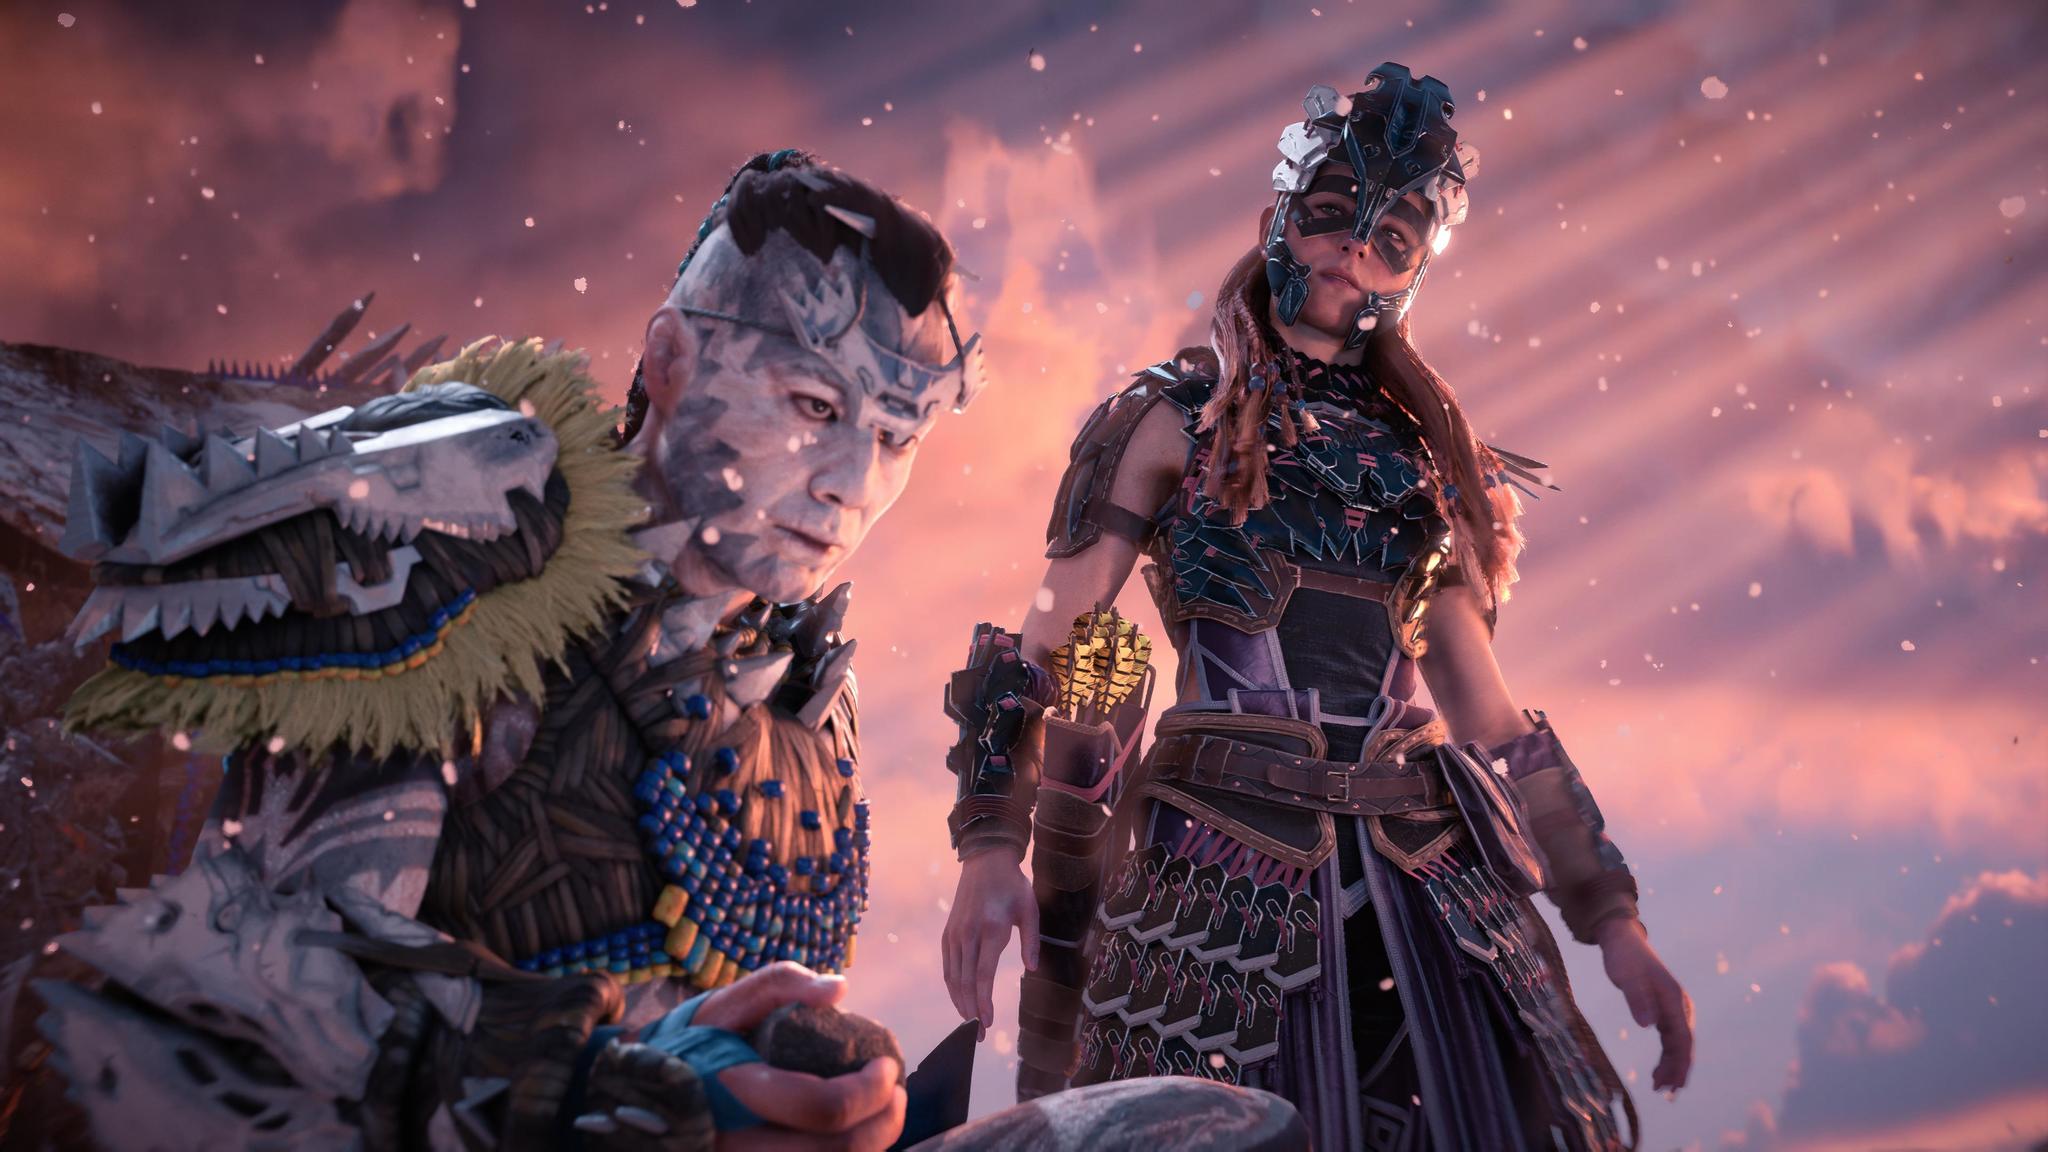 PlayStation recap: Horizon Forbidden West launches to rave reviews